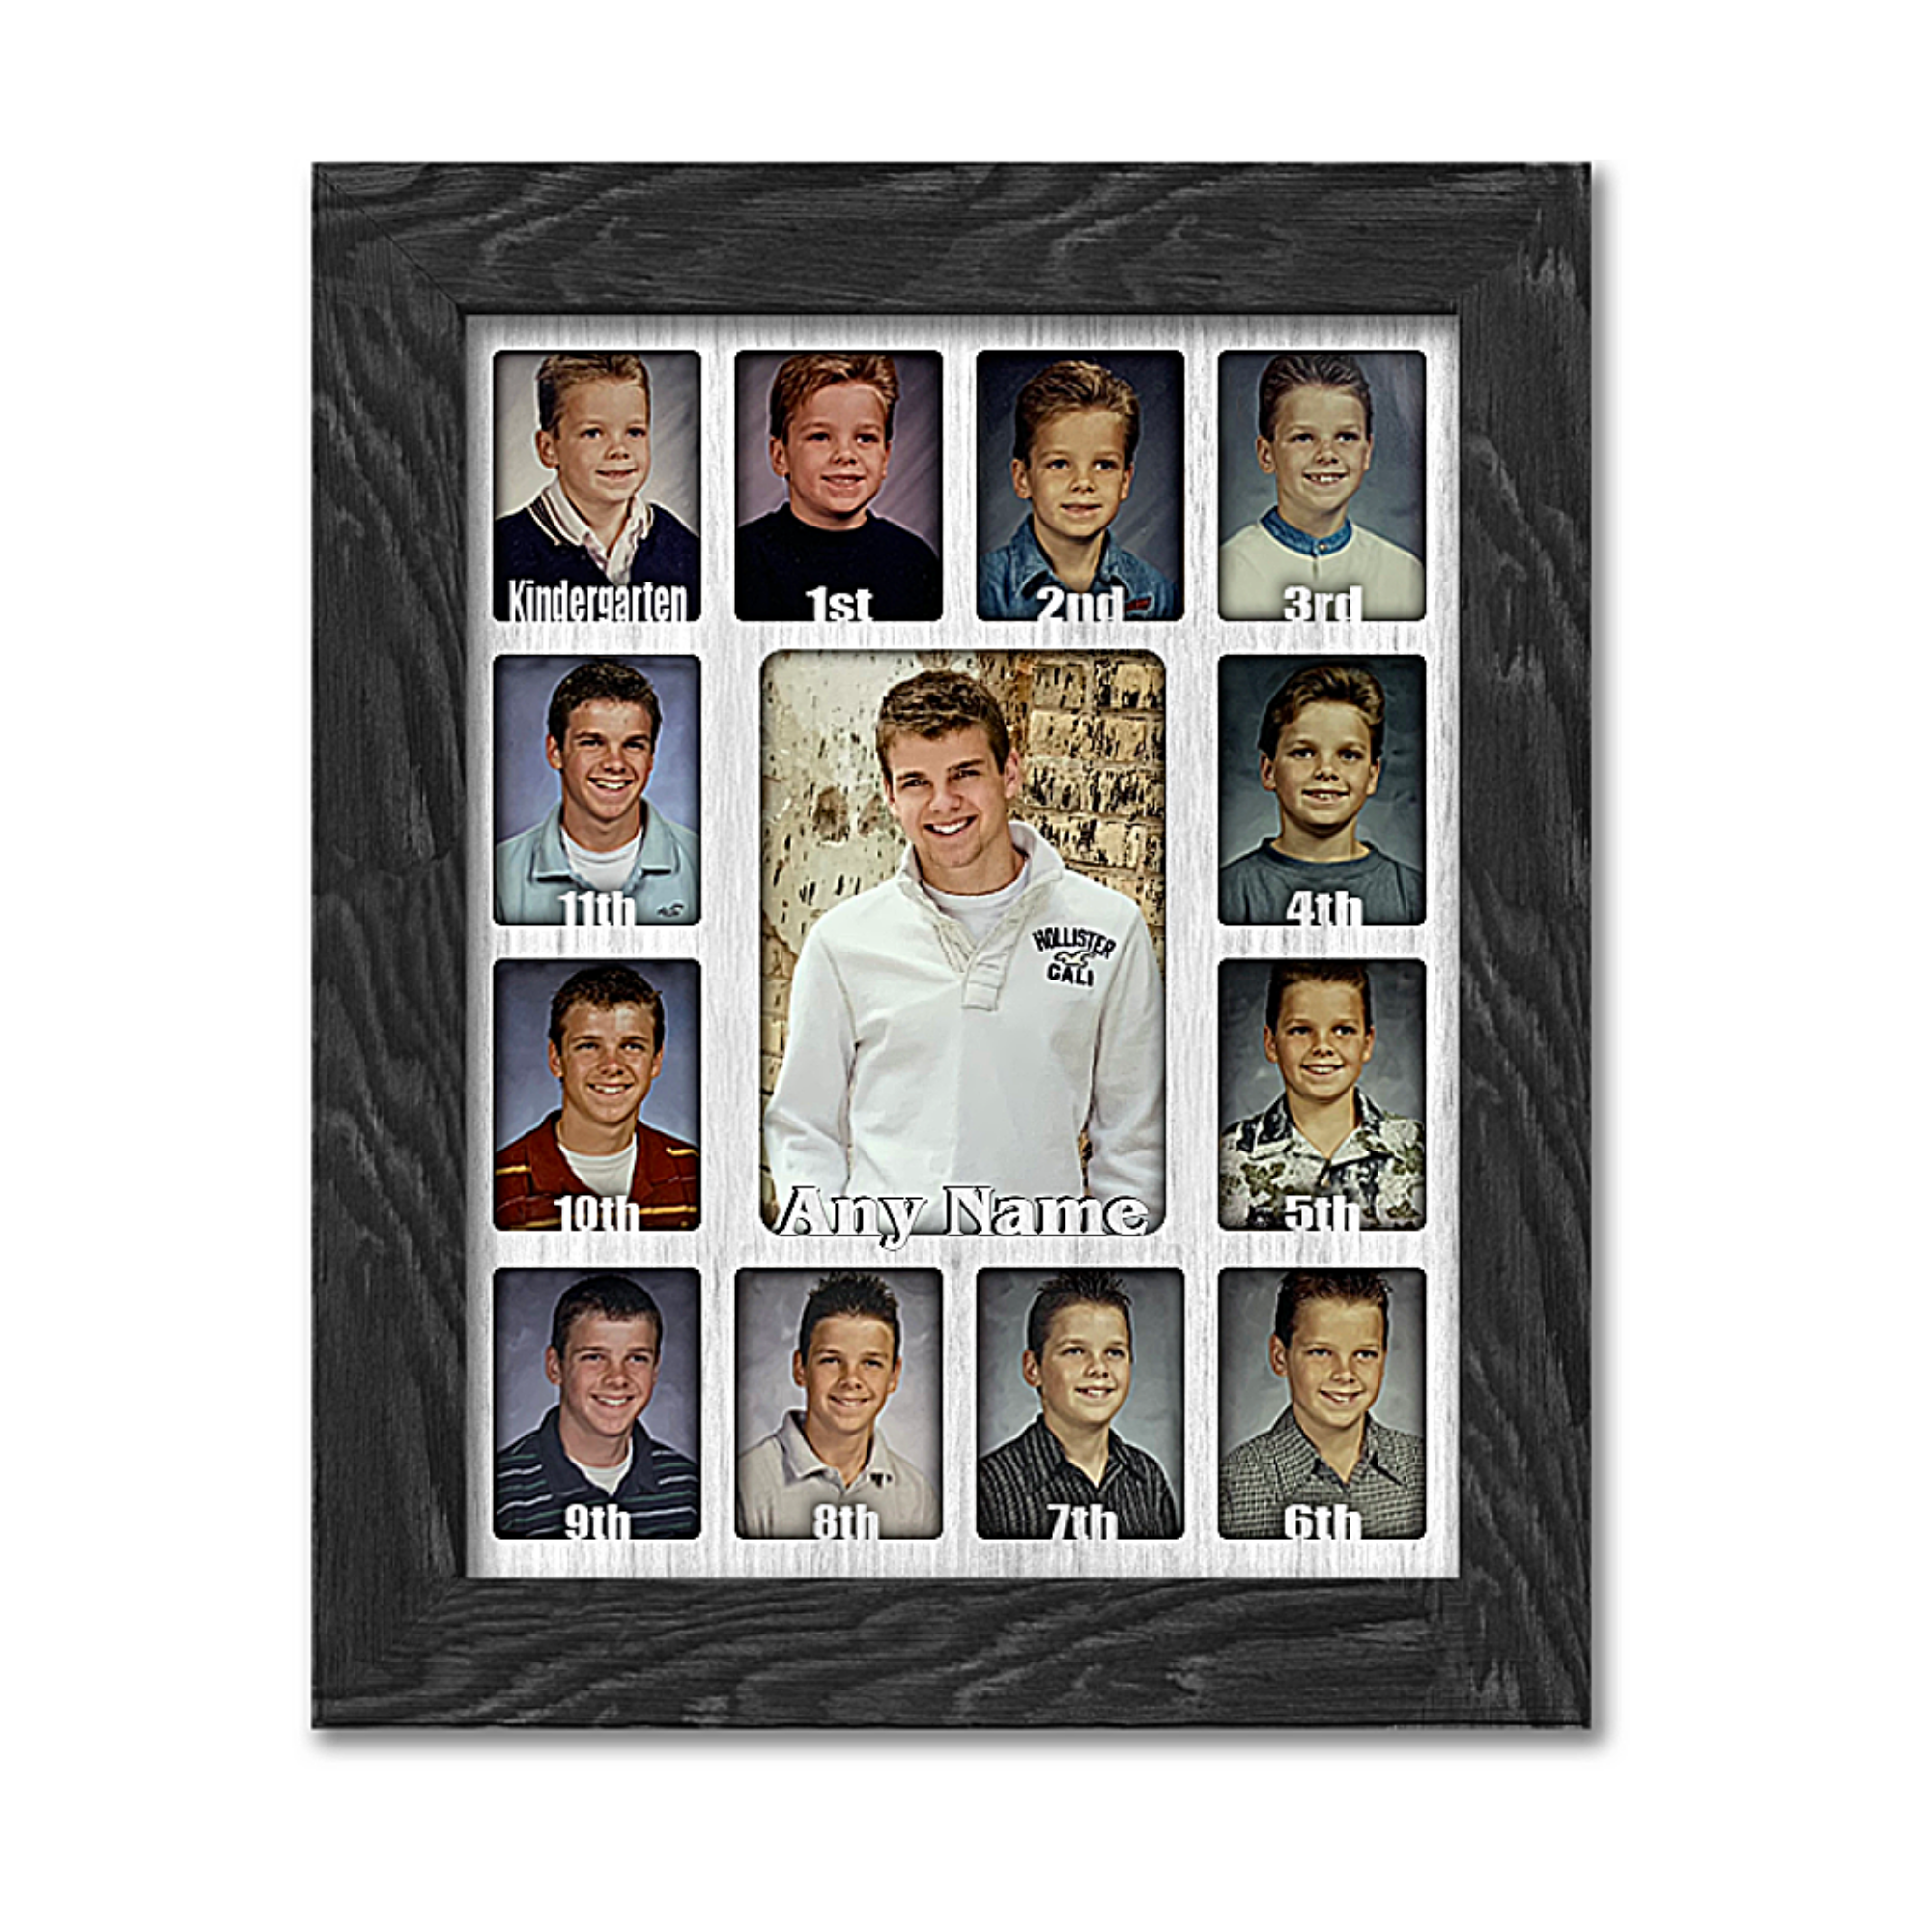 https://cdn11.bigcommerce.com/s-ao9l4h/images/stencil/original/products/1220/6552/School_Years_Picture_Frame_-_Personalized_-_Holds_Twelve_2.5_x_3.5_School-Year_Photos_and_5_x_7_Graduation_Picture_2__54820.1646902087.png?c=2